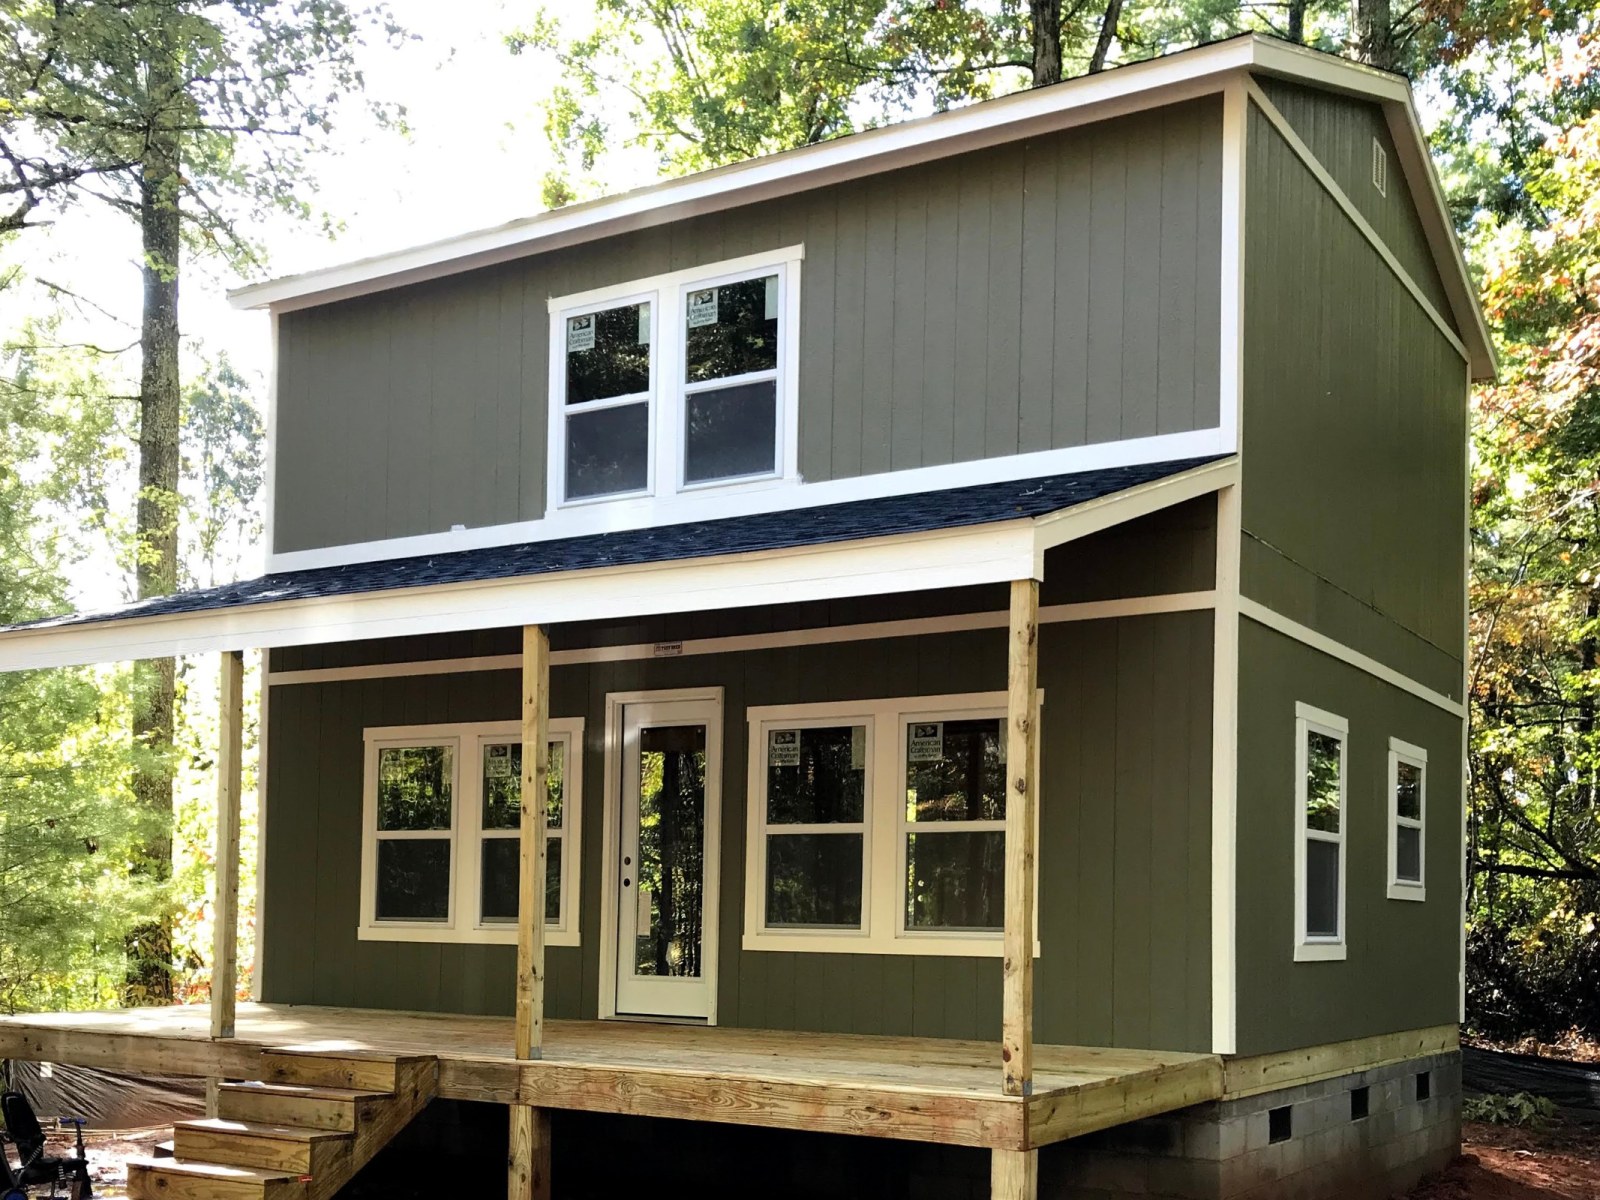 We Turned a Home Depot Shed Into a Tiny House and Sold it for